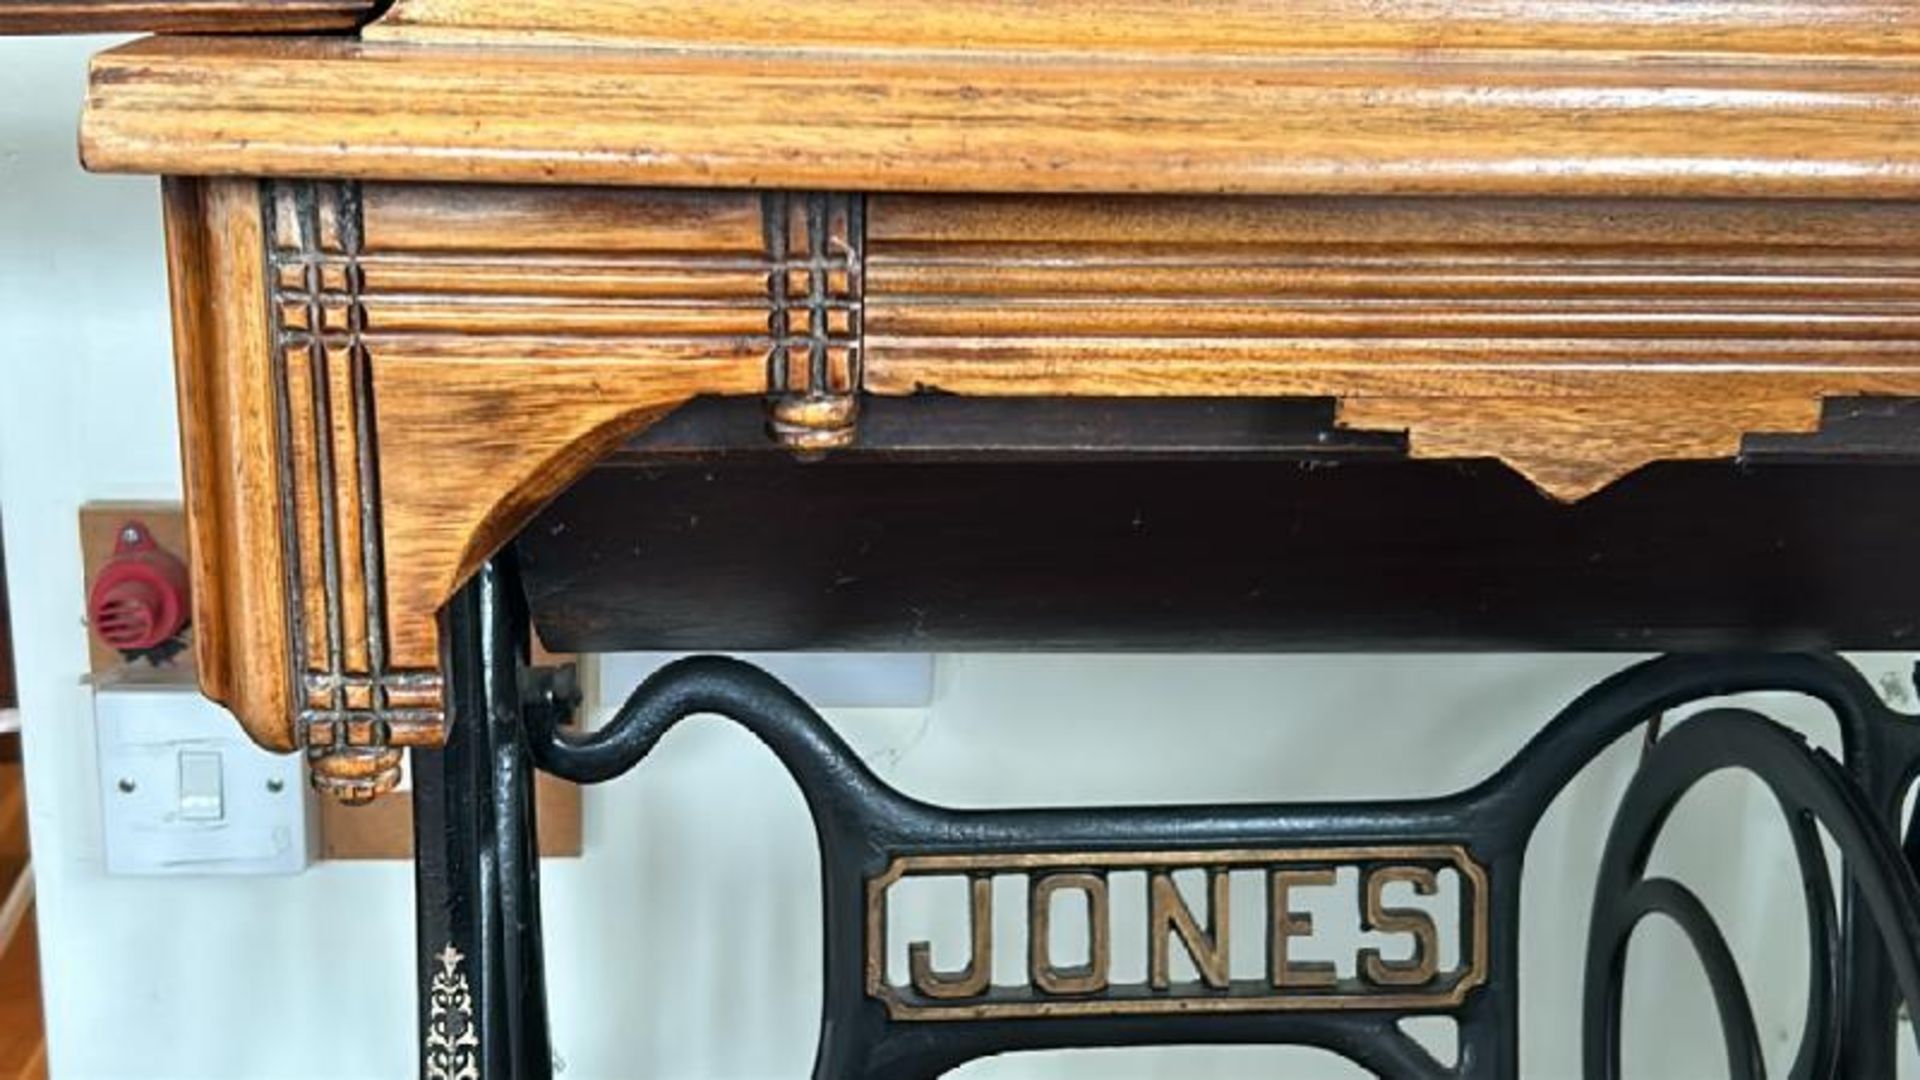 Jones sewing machine number 33225 with flip top table 75cm high (collection from private residence - Image 7 of 11